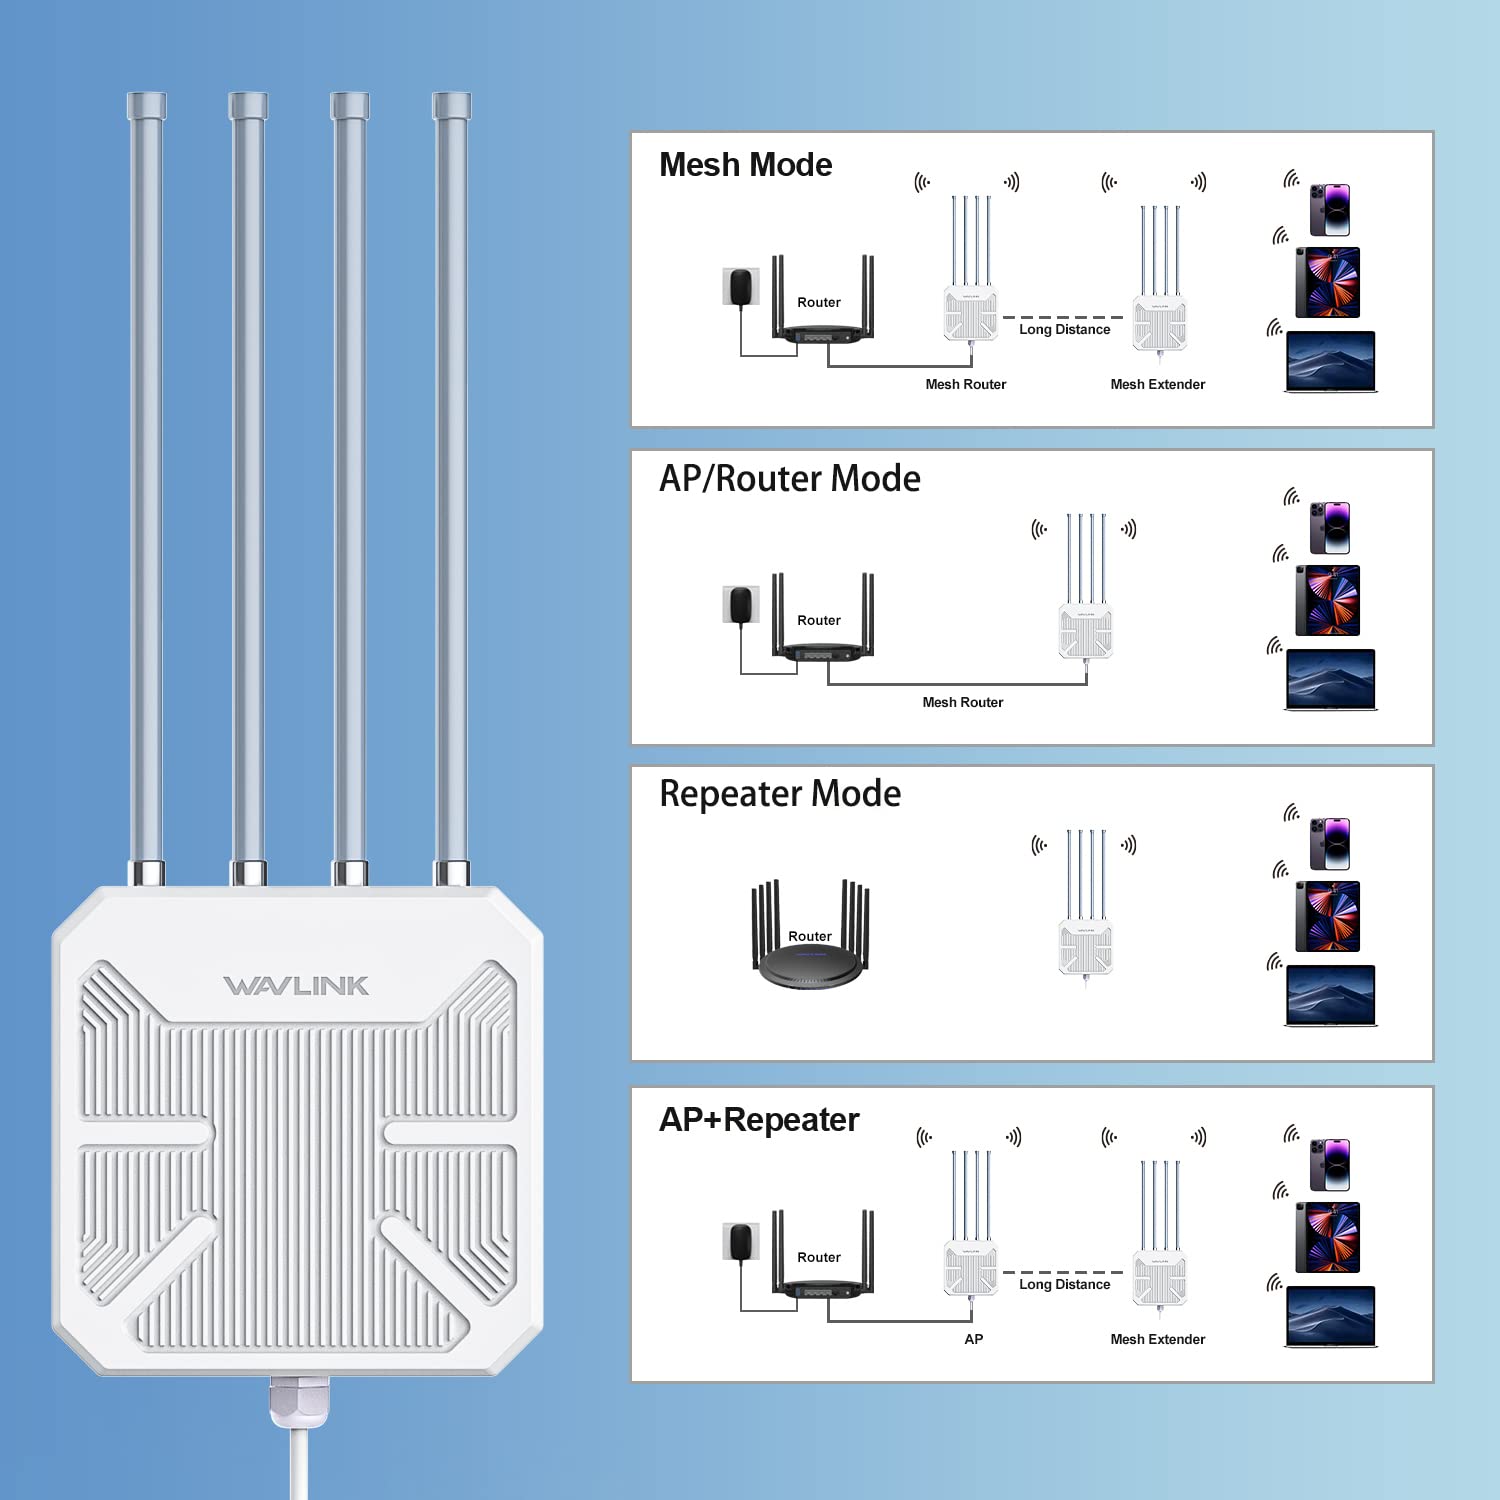 WAVLINK Outdoor WiFi 6 Extender AX1800 High Power Outdoor Weatherproof WiFi Range Extender Access Point with Passive/Active POE, Dual Band 2.4GHz+5GHz, 4x8dBi Detachable Antenna